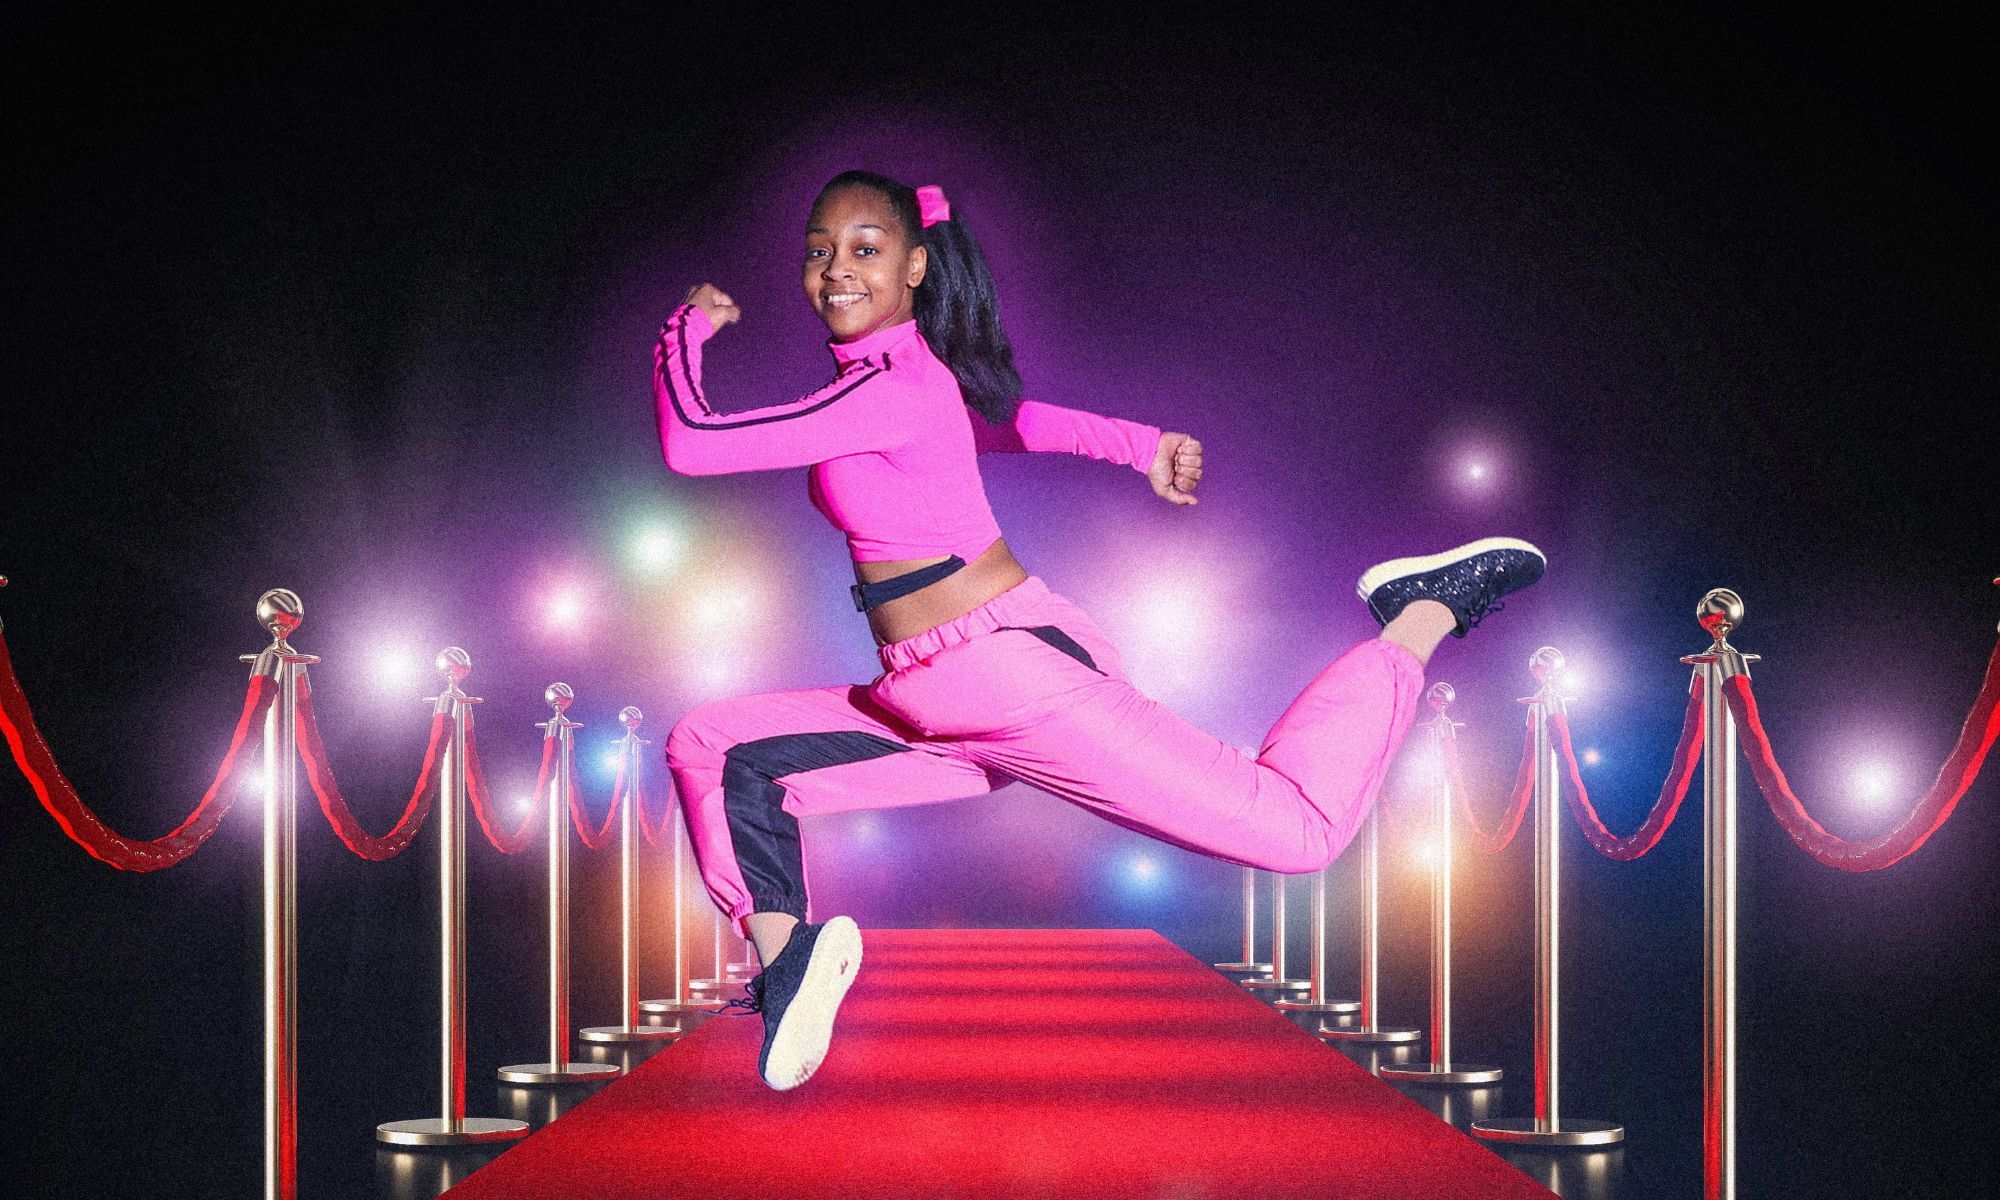 Image of an elegant dancer gracefully positioned on a luxurious red carpet, illuminated by radiant spotlights from above.